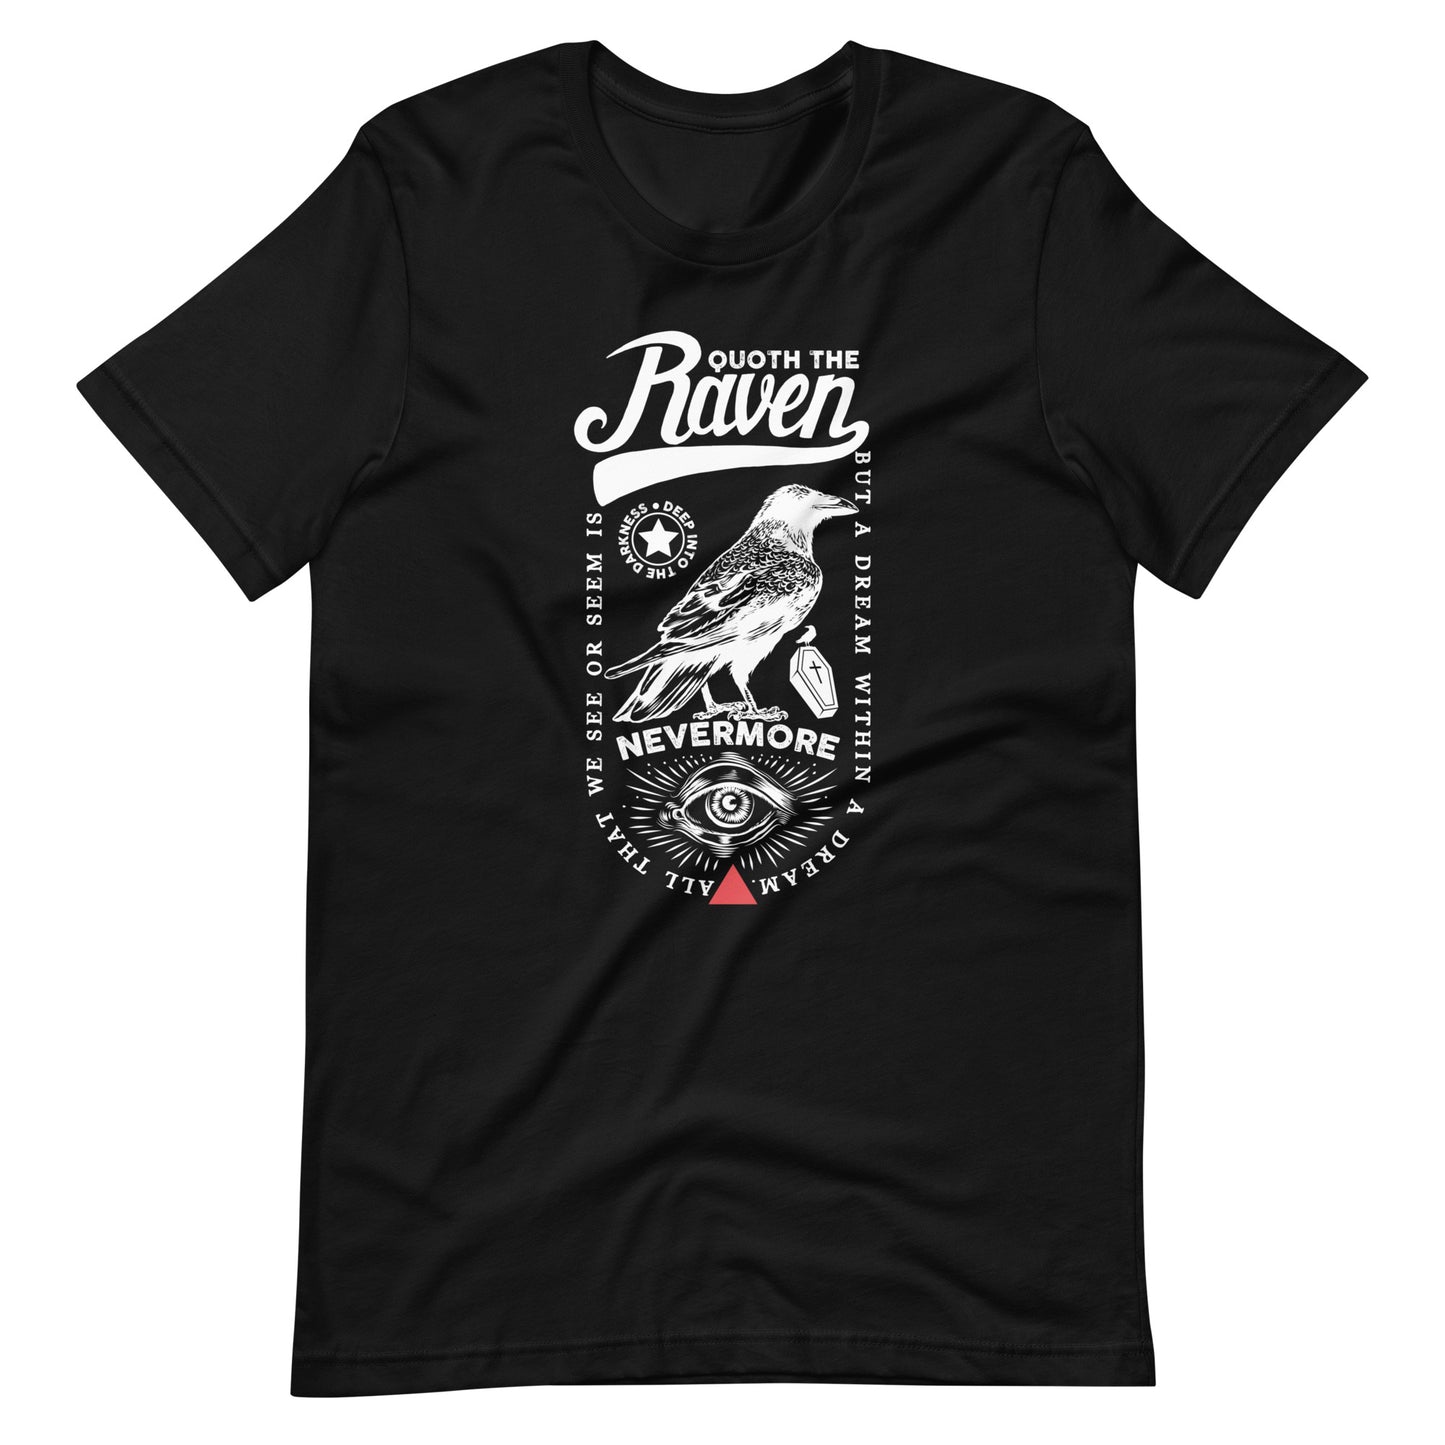 Quoth the Raven Nevermore Loaded - Men's t-shirt - Black Front